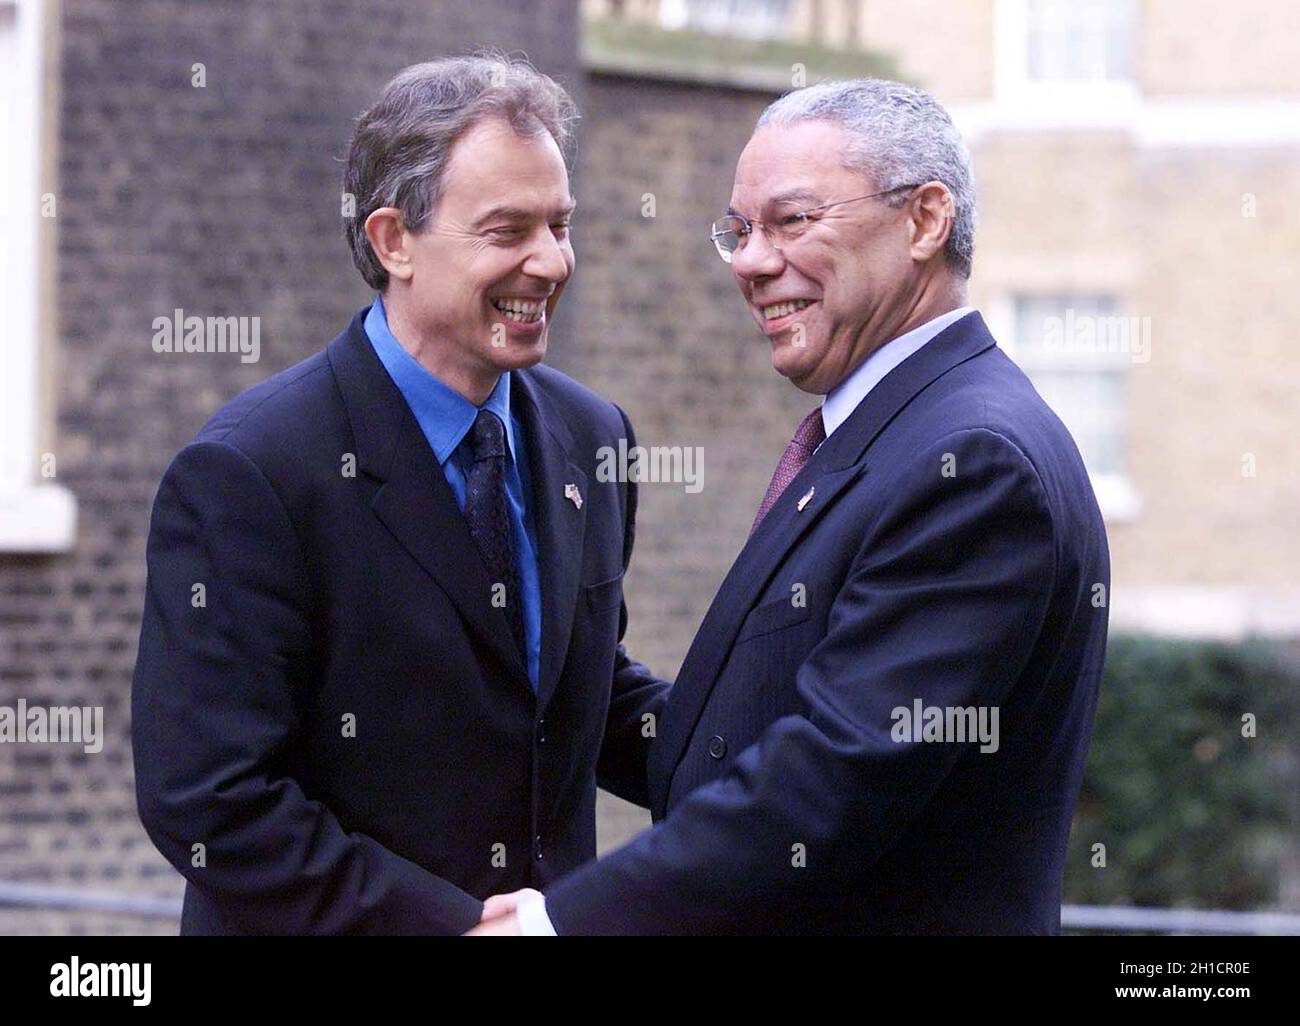 File photo dated 11/12/01 of the then Prime Minister Tony Blair (left) greeting US Secretary of State Colin Powell outside 10 Downing Street in central London, ahead of a ceremony to mark three months since the September 11 terrorist attacks in New York and Washington DC. Colin Powell, the former US Joint Chiefs chairman and US secretary of state, has died from Covid-19 complications, his family has said. Issue date: Monday October 18, 2021. Stock Photo